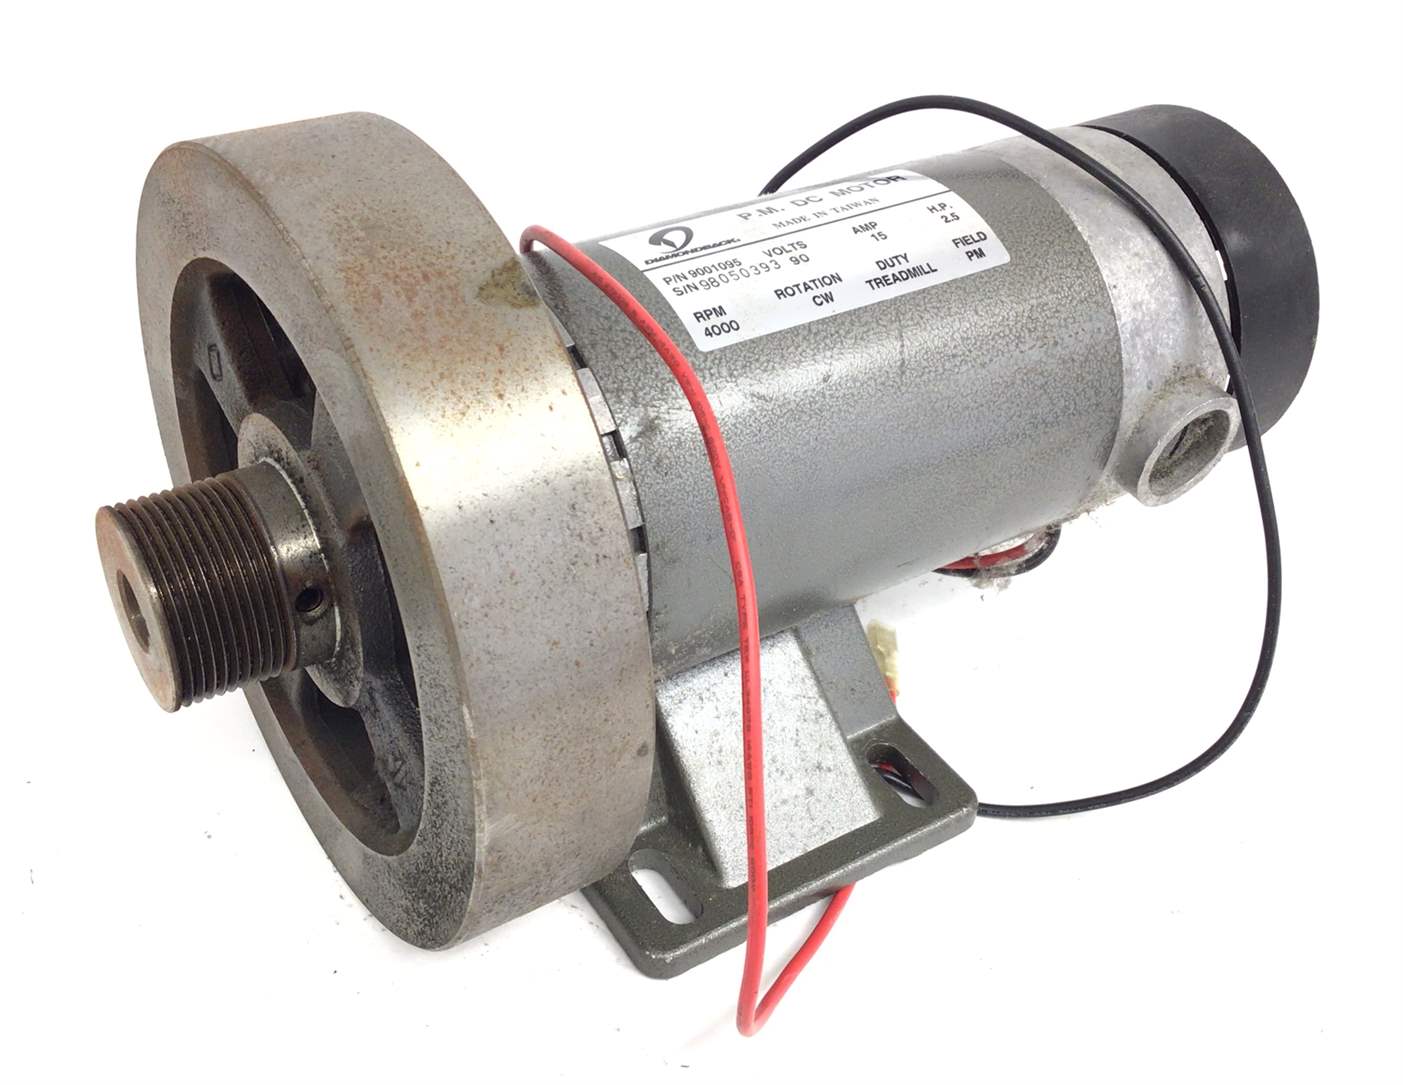 DC Drive Motor with Flywheel (Used)